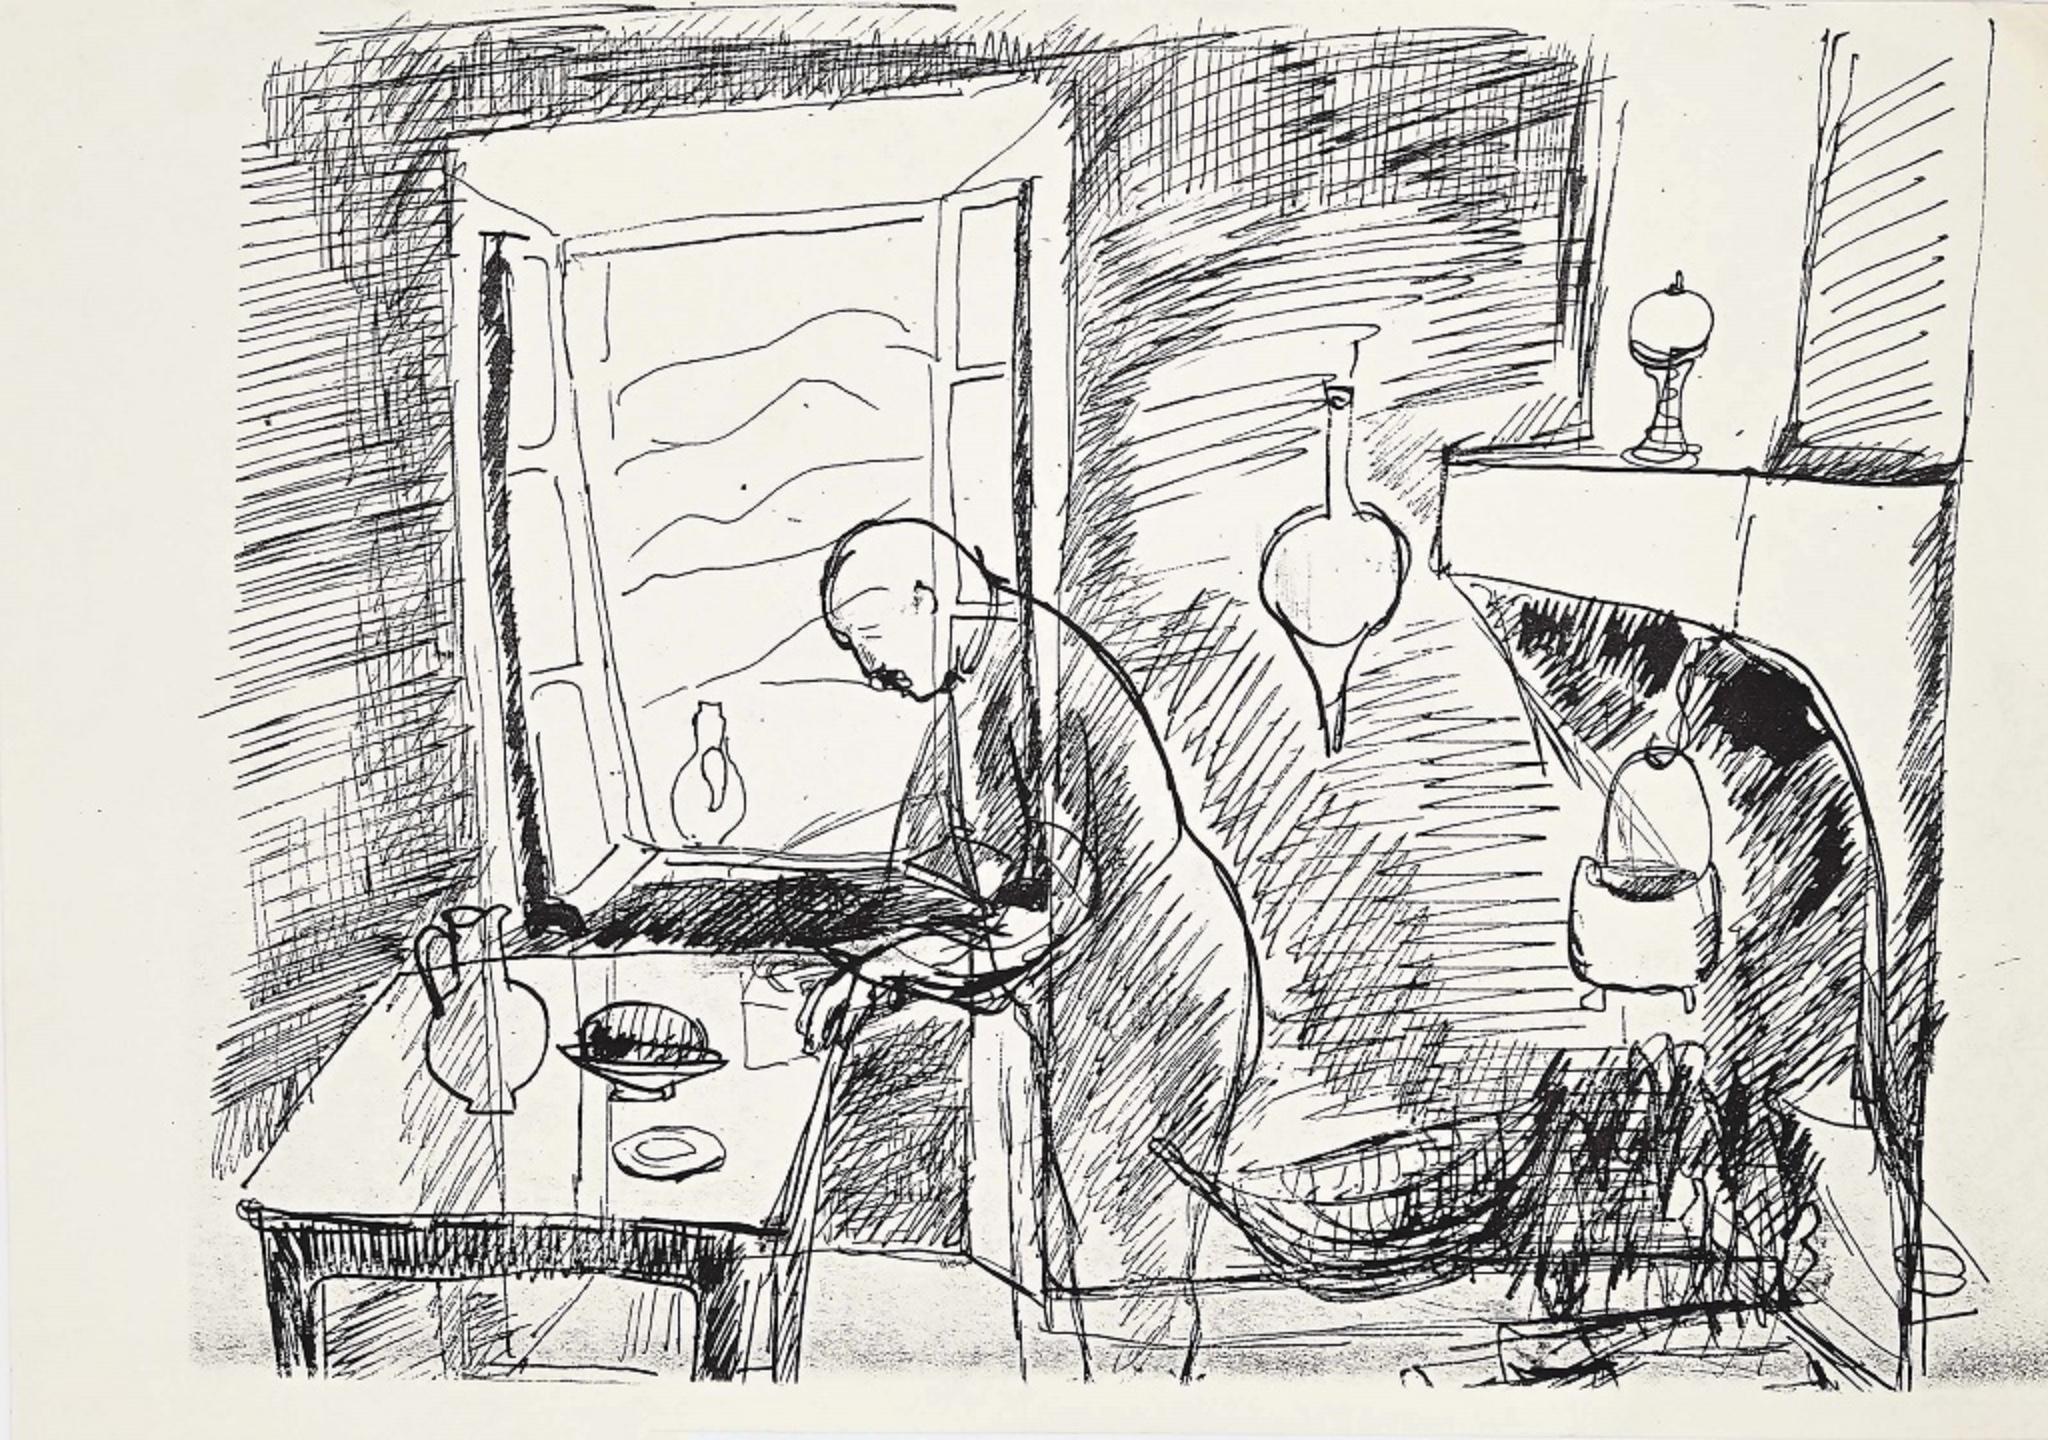 In the Kitchen - Original black pen drawing by Herna Hausmann - Mid-20th century